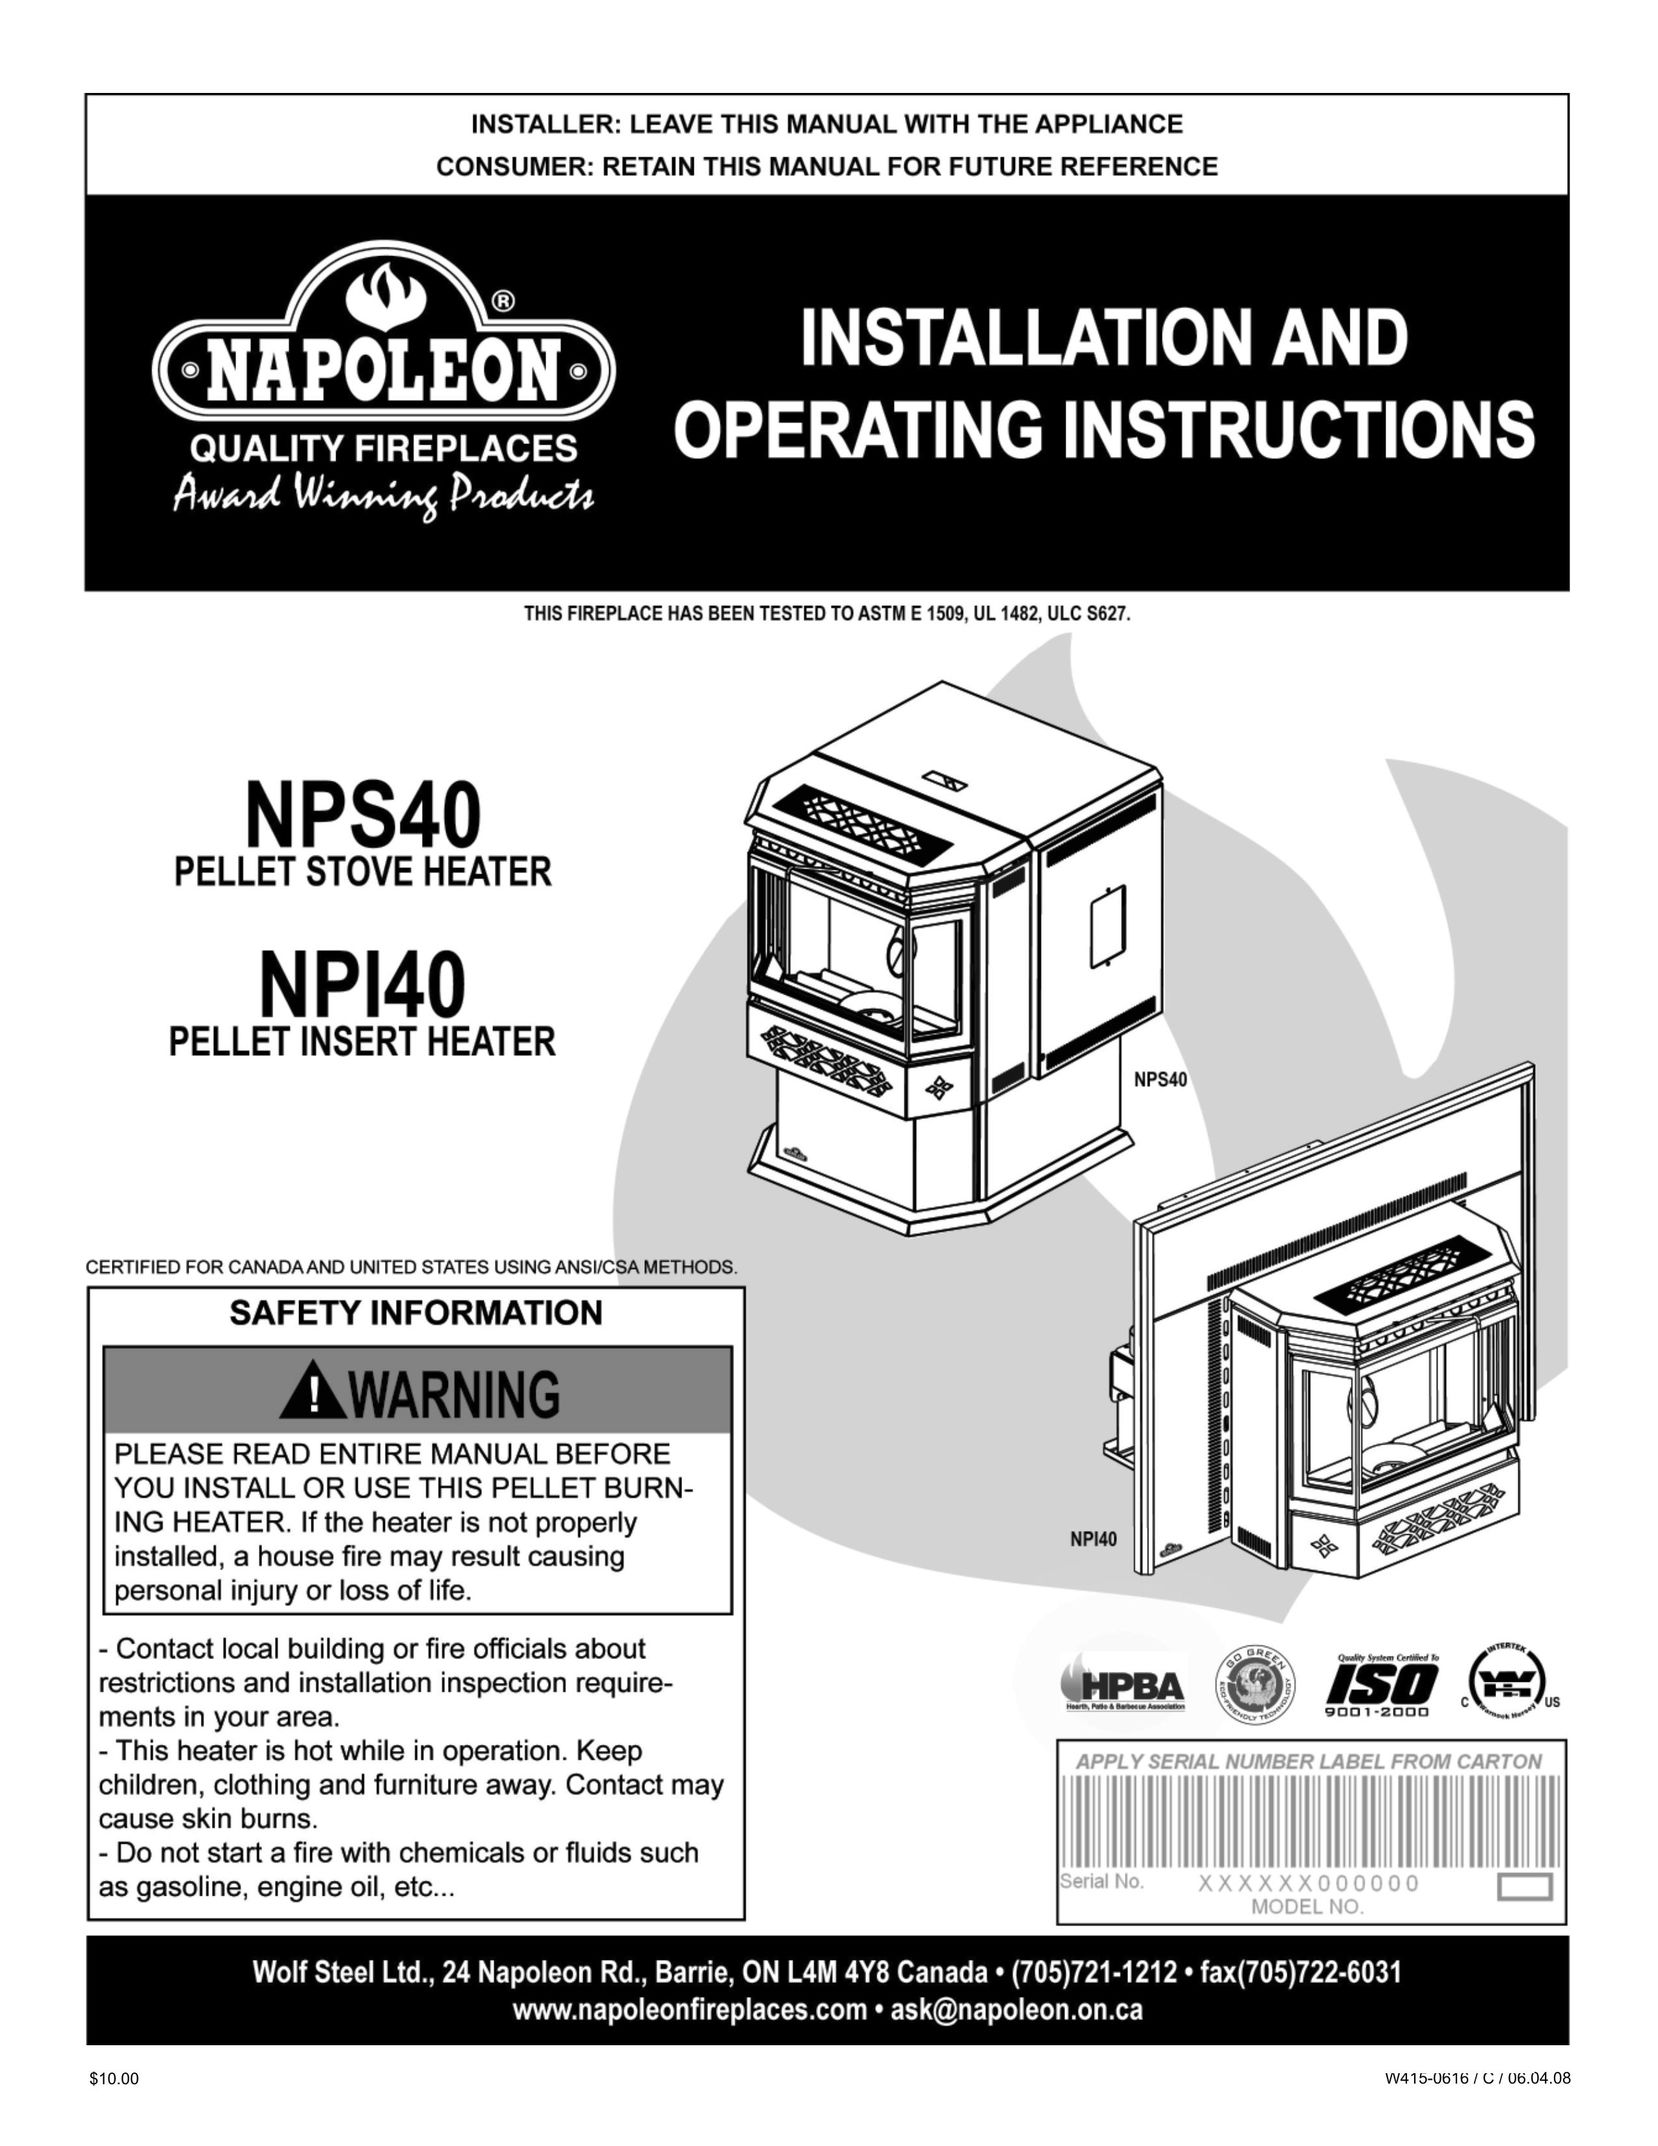 Napoleon Fireplaces NPS40 Air Conditioner User Manual